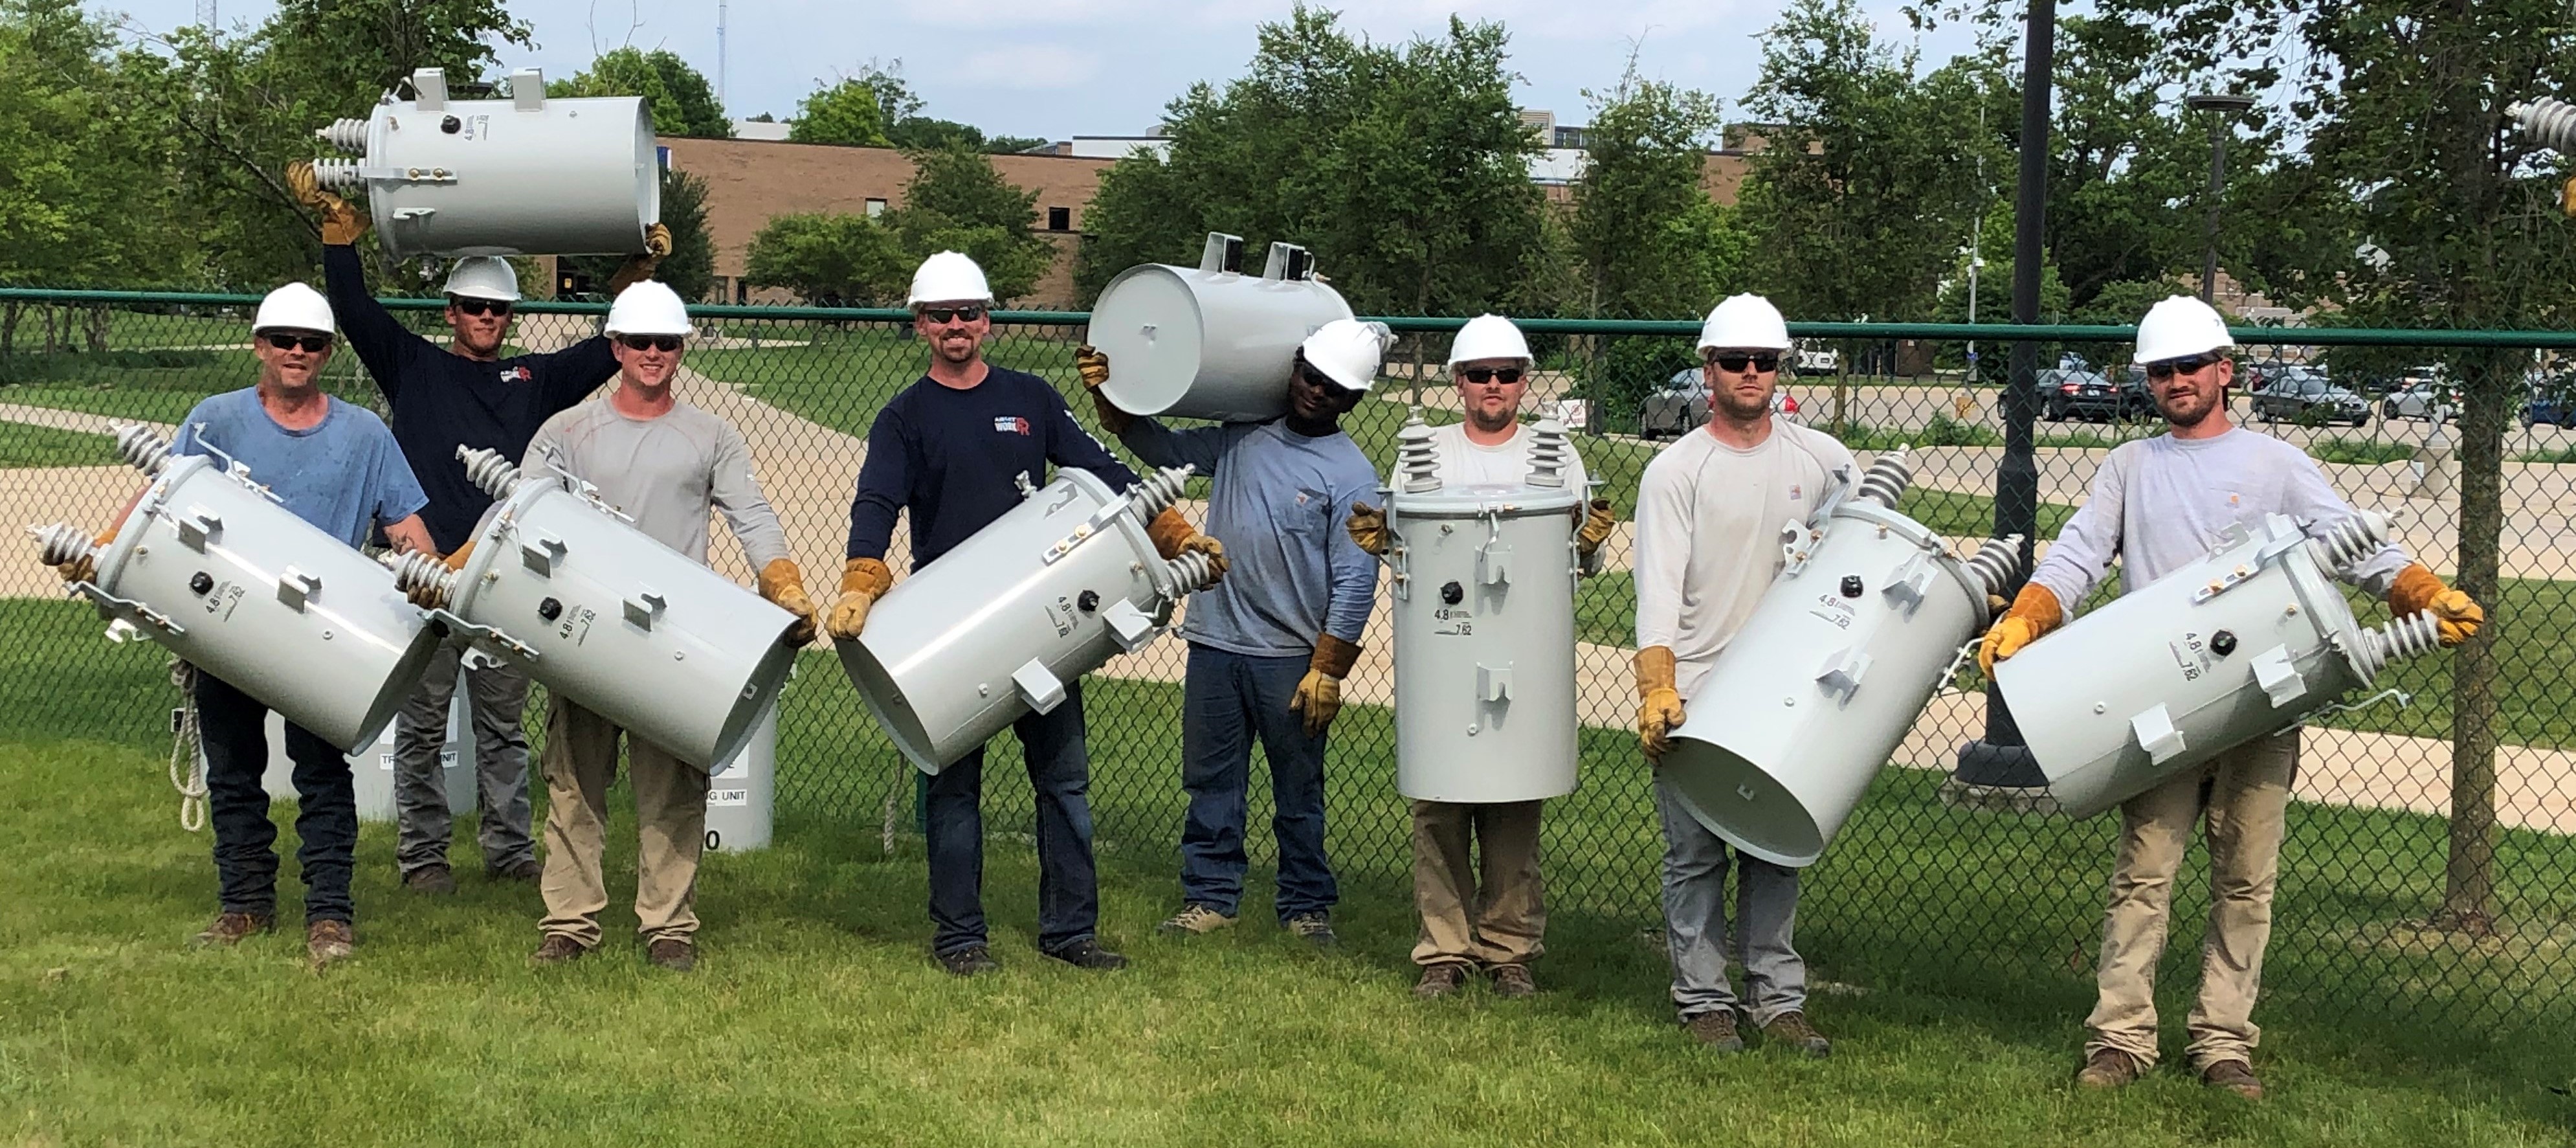 DTE workers show their muscle by lifting transformers. HFC is using oil-free transformers due to EPA regulations and the close proximity of the Rouge River. 